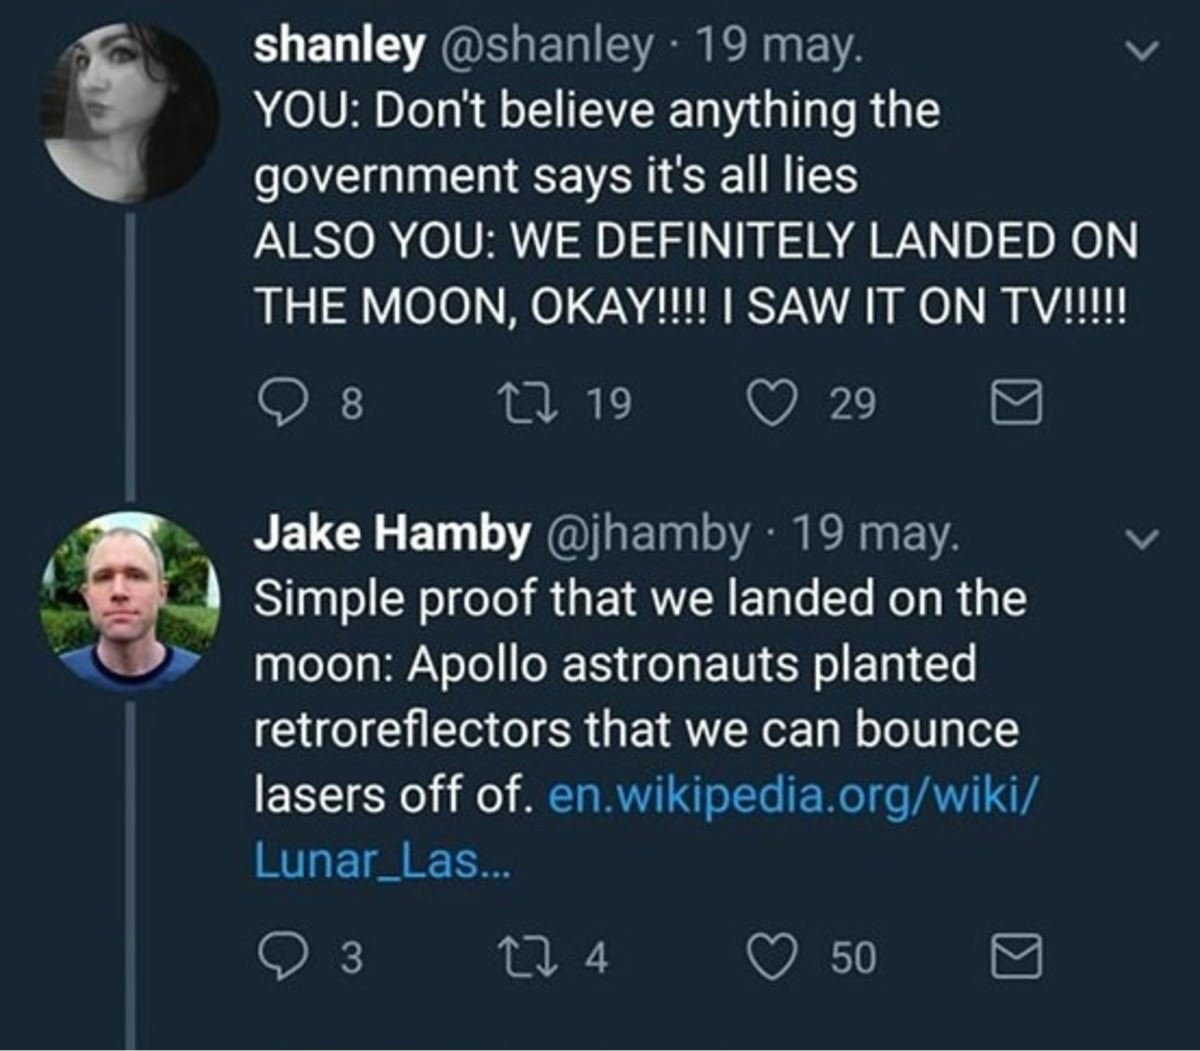 atmosphere - shanley 19 may. You Don't believe anything the government says it's all lies Also You We Definitely Landed On The Moon, Okay!!!! I Saw It On Tv!!!!! 8 17 19 29 Jake Hamby 19 may. Simple proof that we landed on the moon Apollo astronauts plant